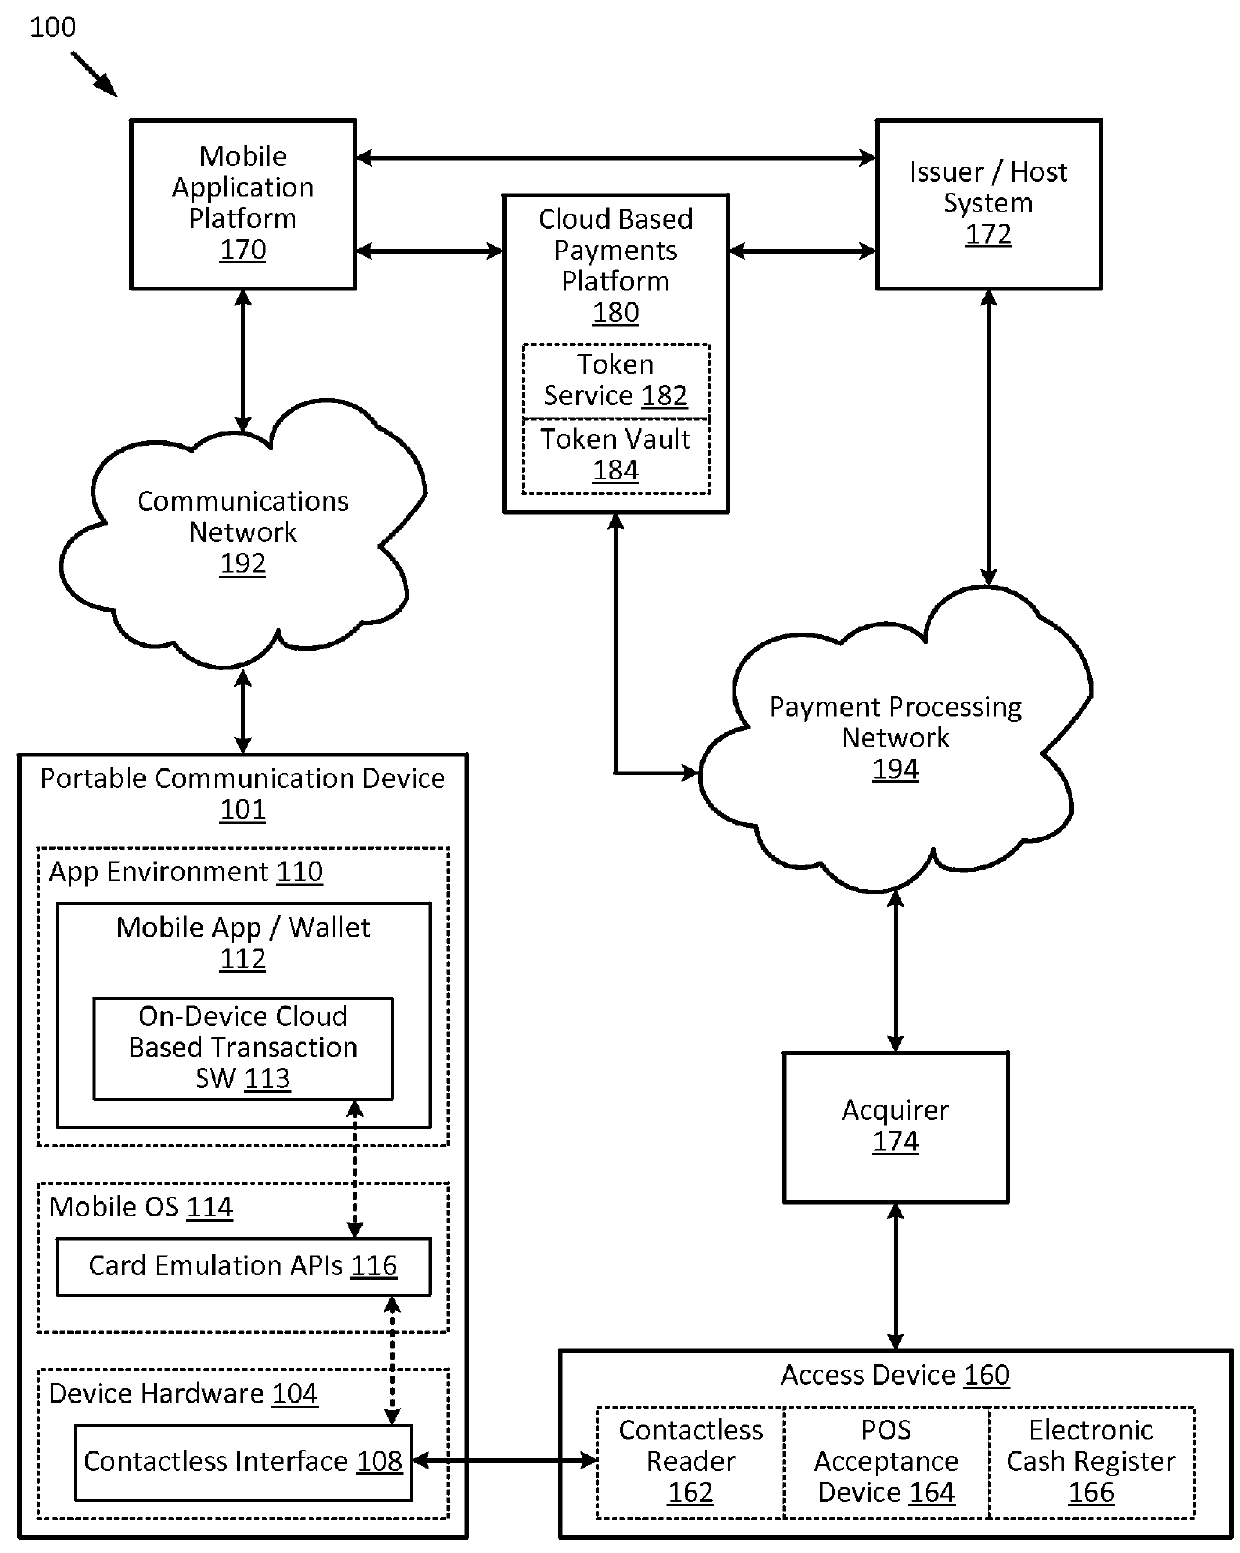 Embedding cloud-based functionalities in a communication device